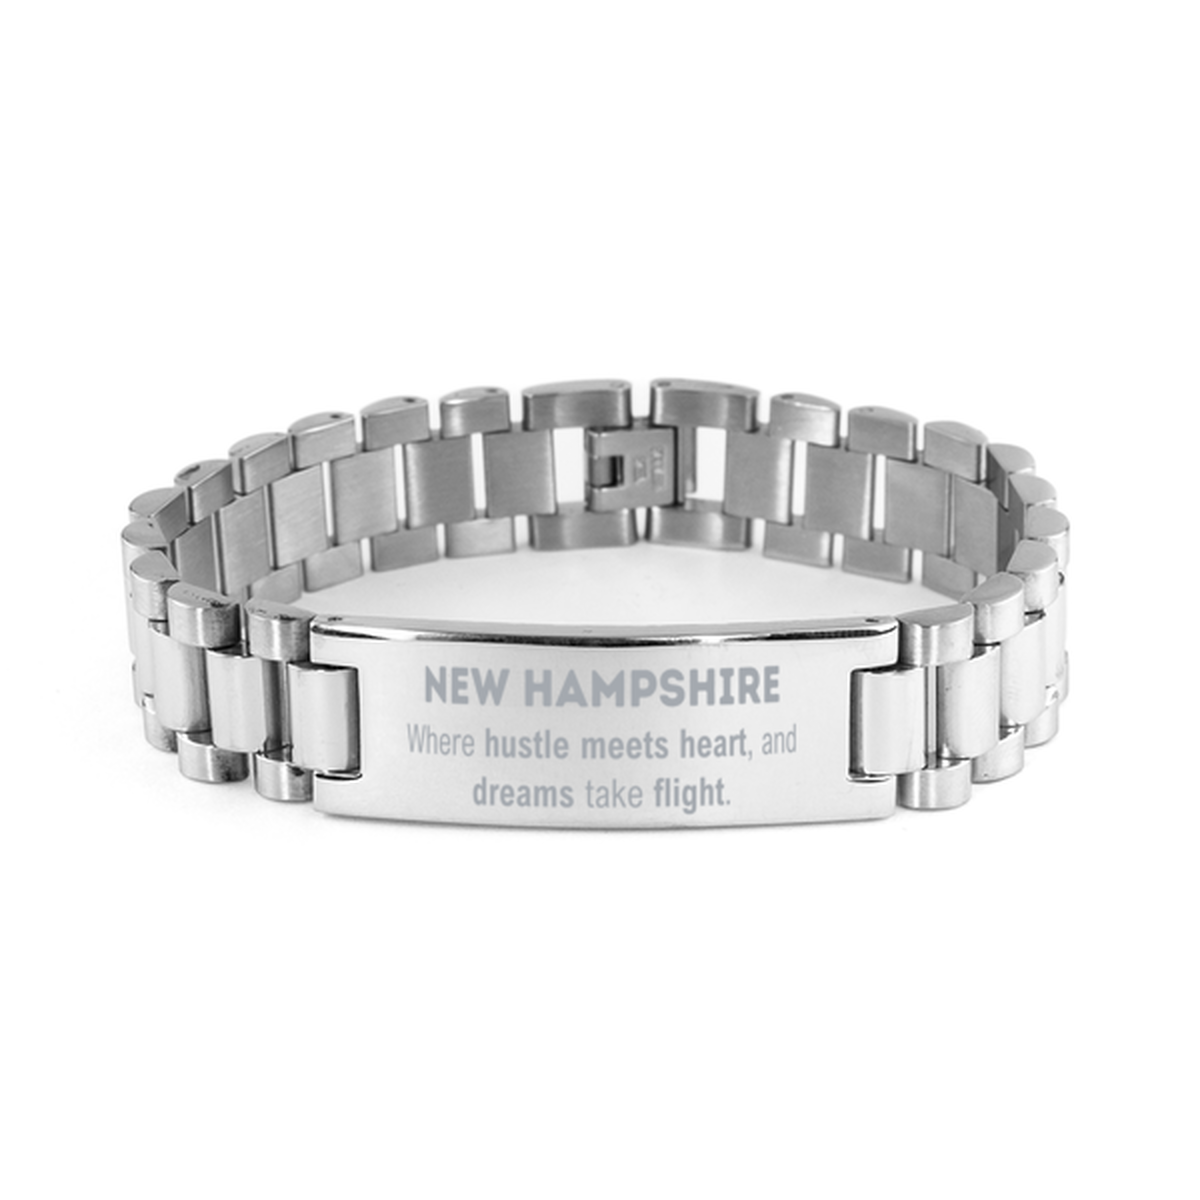 New Hampshire: Where hustle meets heart, and dreams take flight, New Hampshire Gifts, Proud New Hampshire Christmas Birthday New Hampshire Ladder Stainless Steel Bracelet, New Hampshire State People, Men, Women, Friends